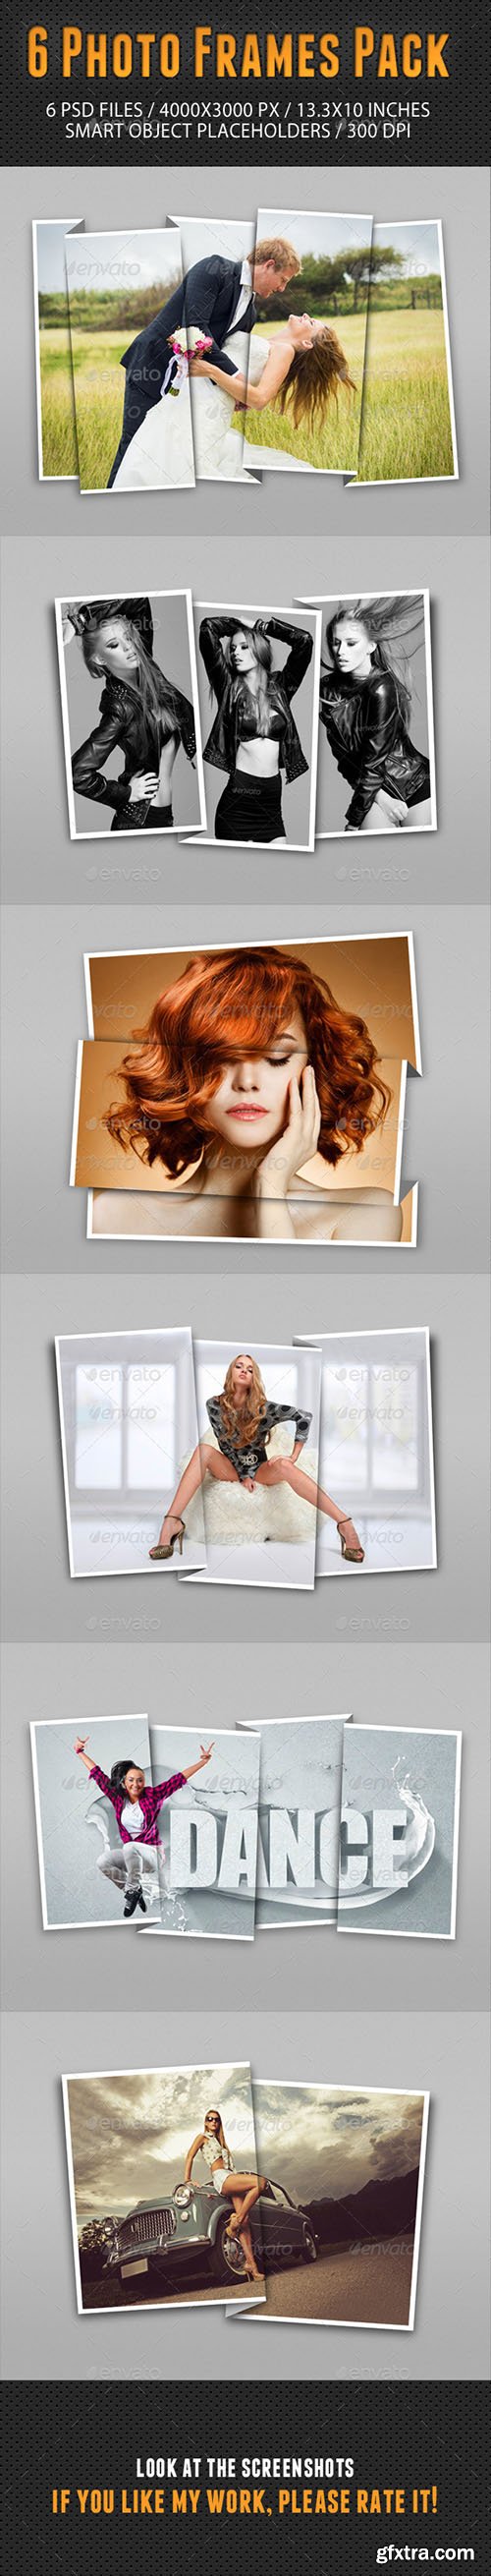 GraphicRiver Photo Frames Pack 13 10202786